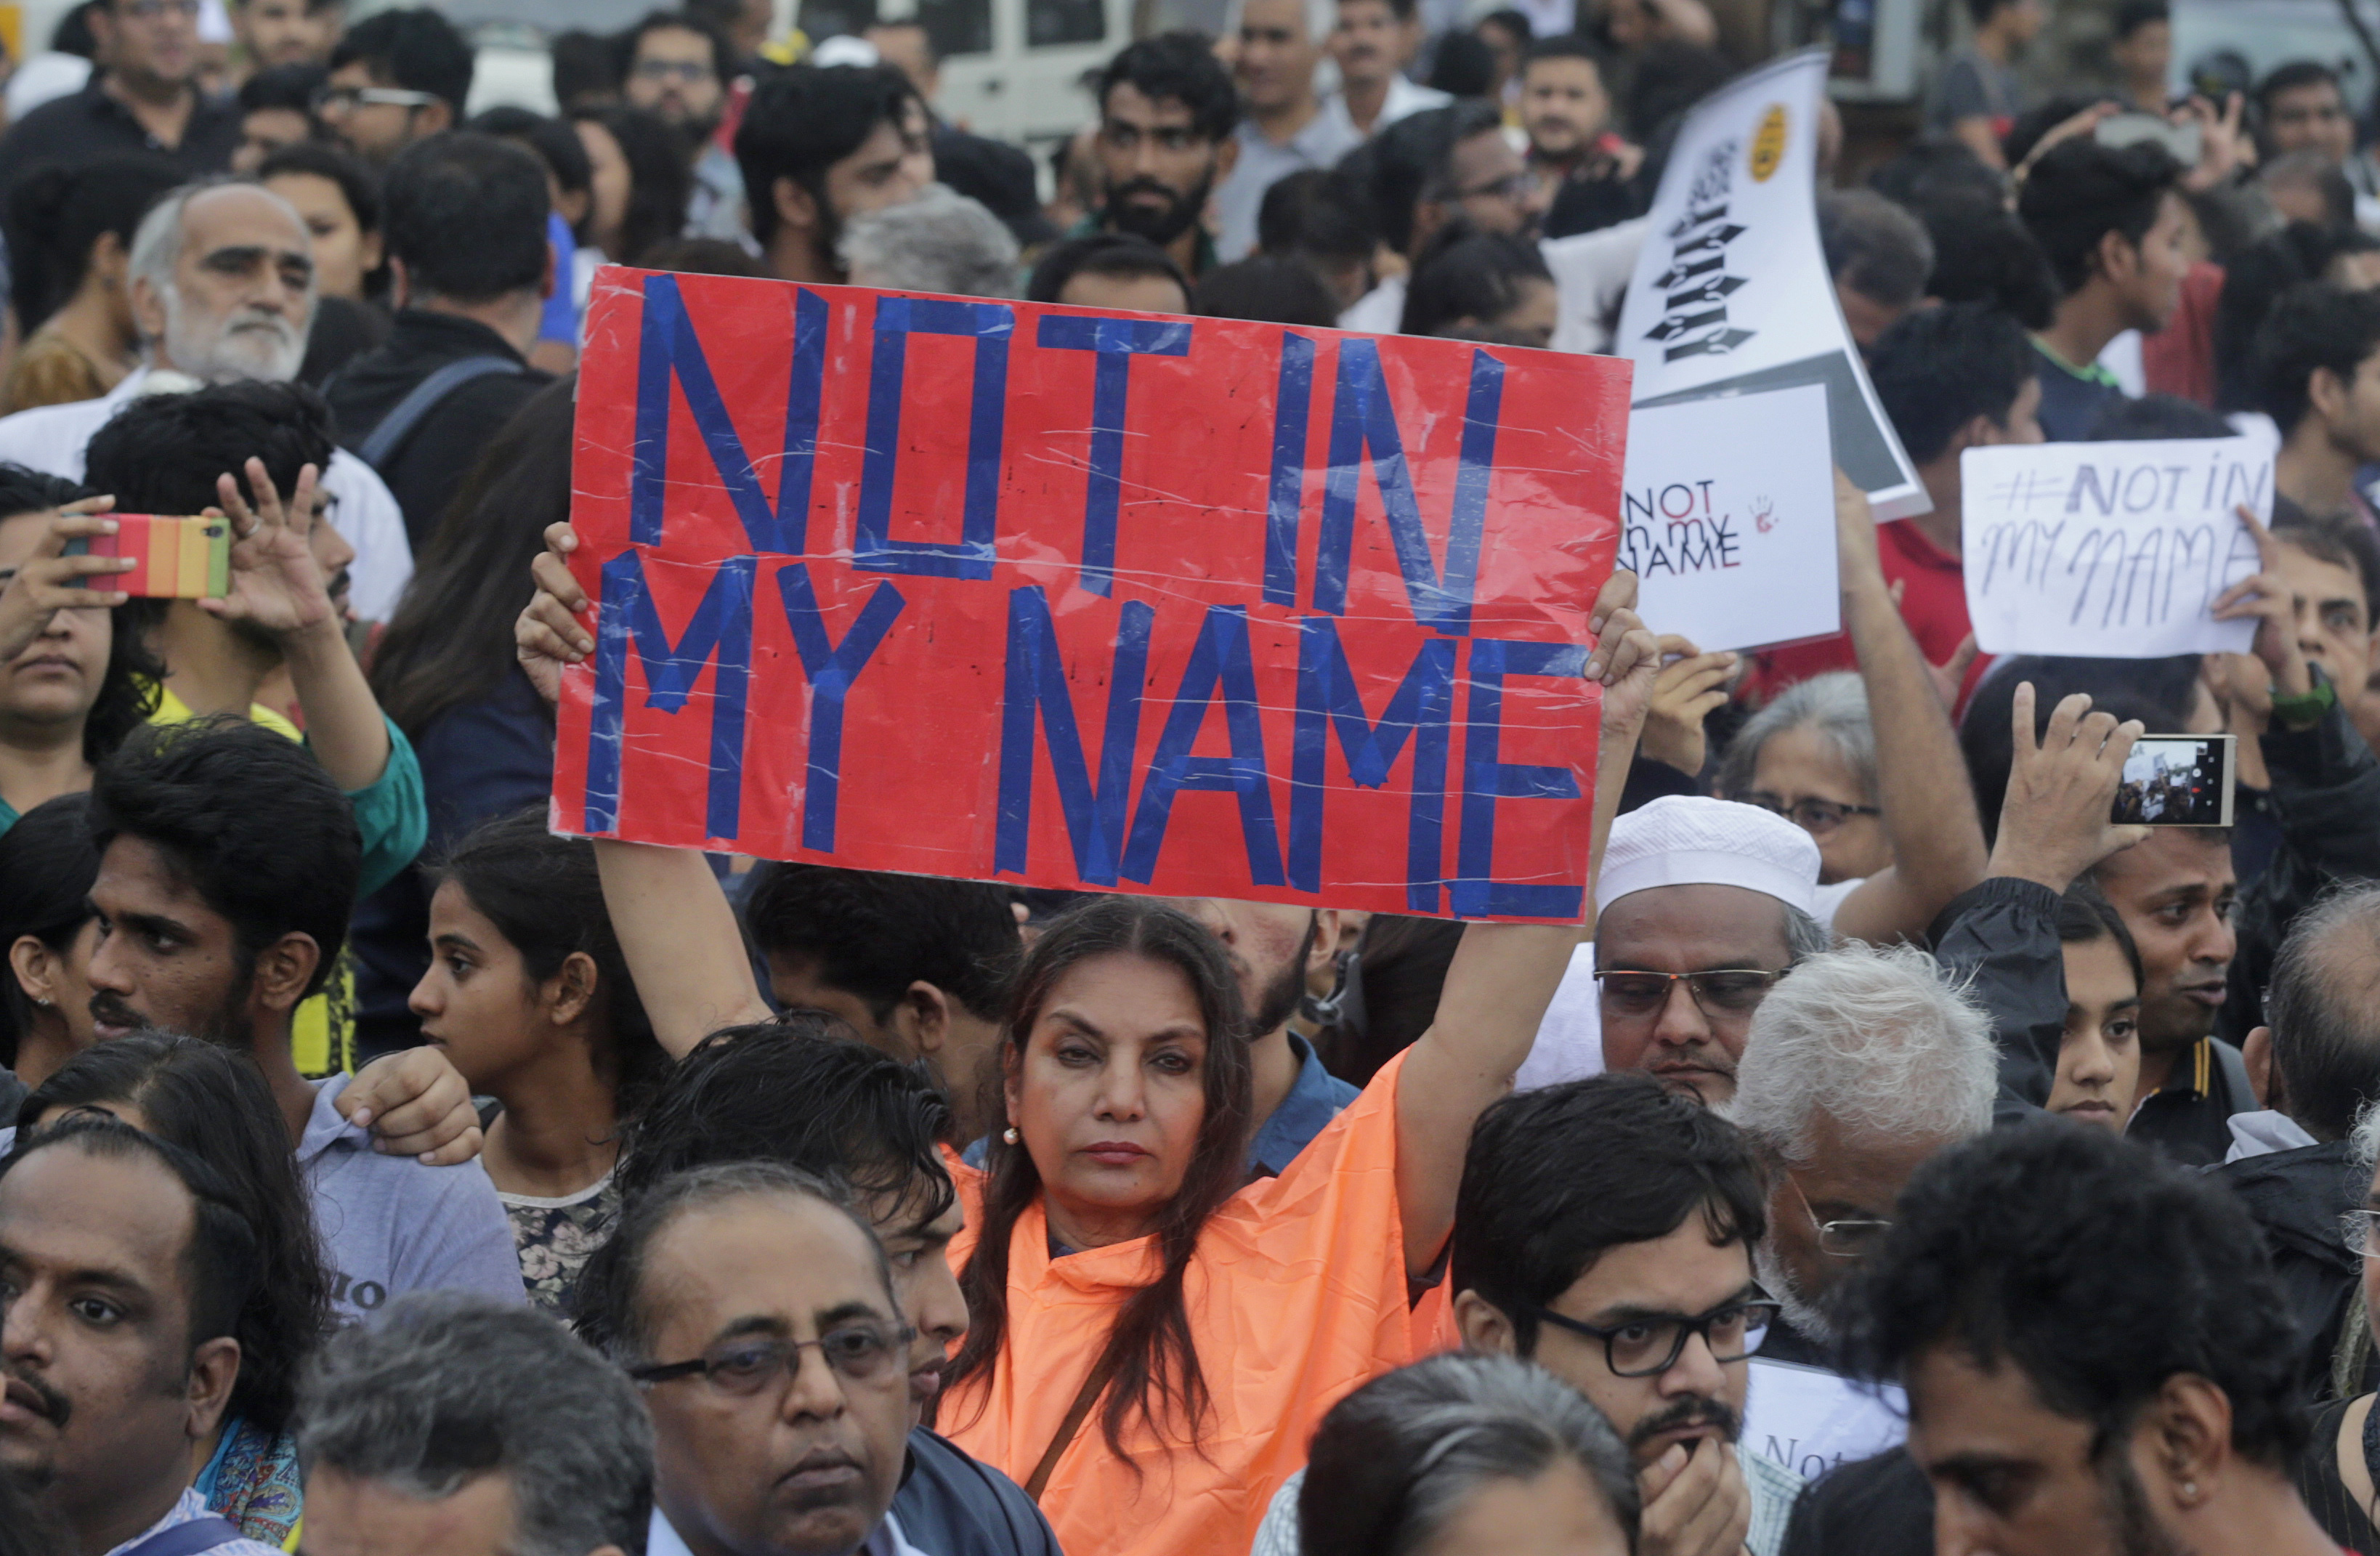 Bollywood actress Shabana Azmi holds a placard high during a protest against a spate of violent attacks across the country targetting the country's Muslim minority, in Mumbai, India, Wednesday, June 28, 2017. Thousands of protestors gathered in different cities to decry the silence of India's Hindu right-wing government in the face of the public lynchings and violent attacks on at least a dozen Muslim men and boys since it was voted to power in 2014. (AP Photo/Rafiq Maqbool)